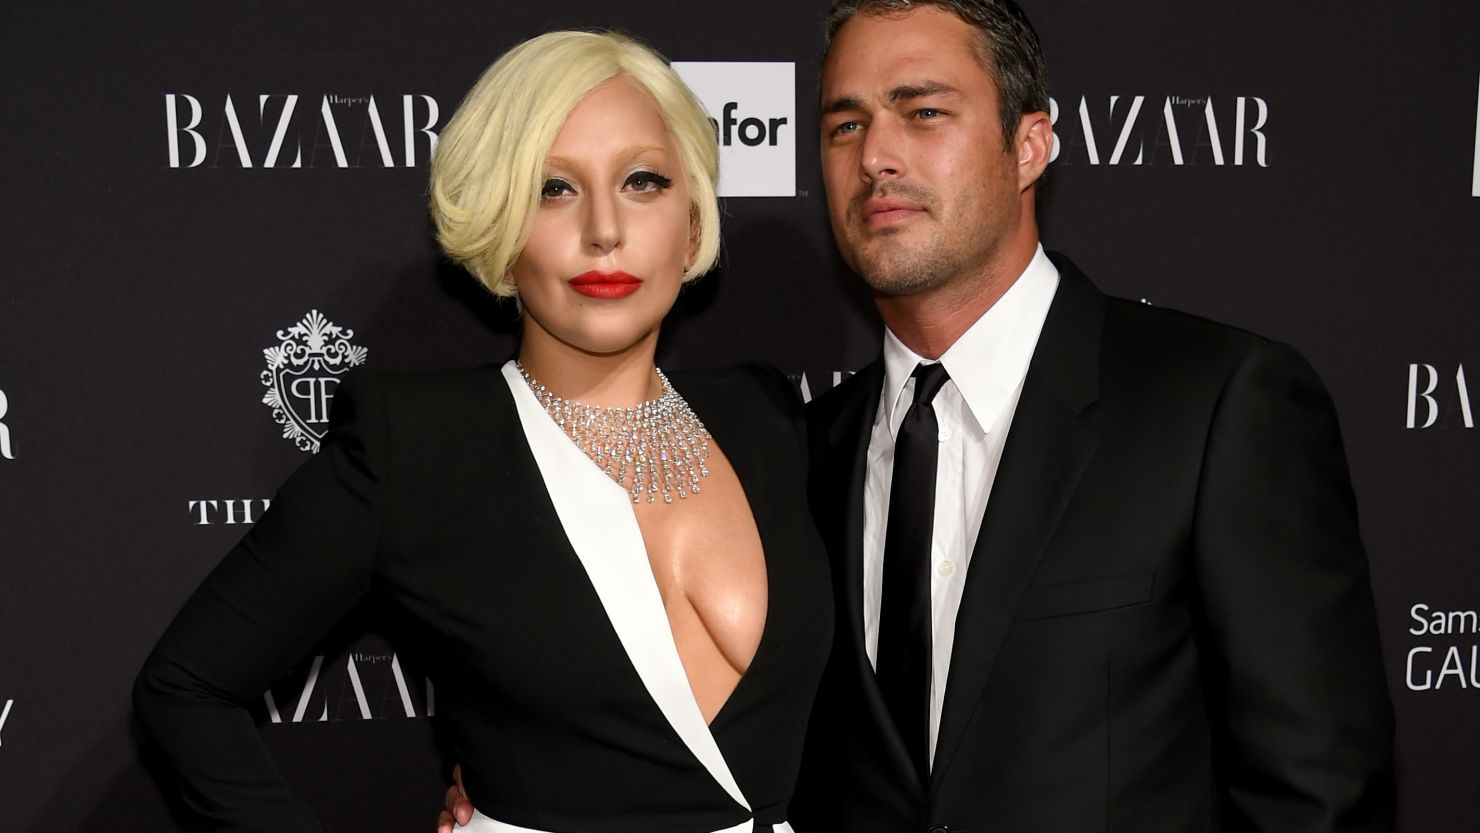 Lady Gaga and Taylor Kinney attend a Samsung and Harper's Bazaar event in New York on September 5.